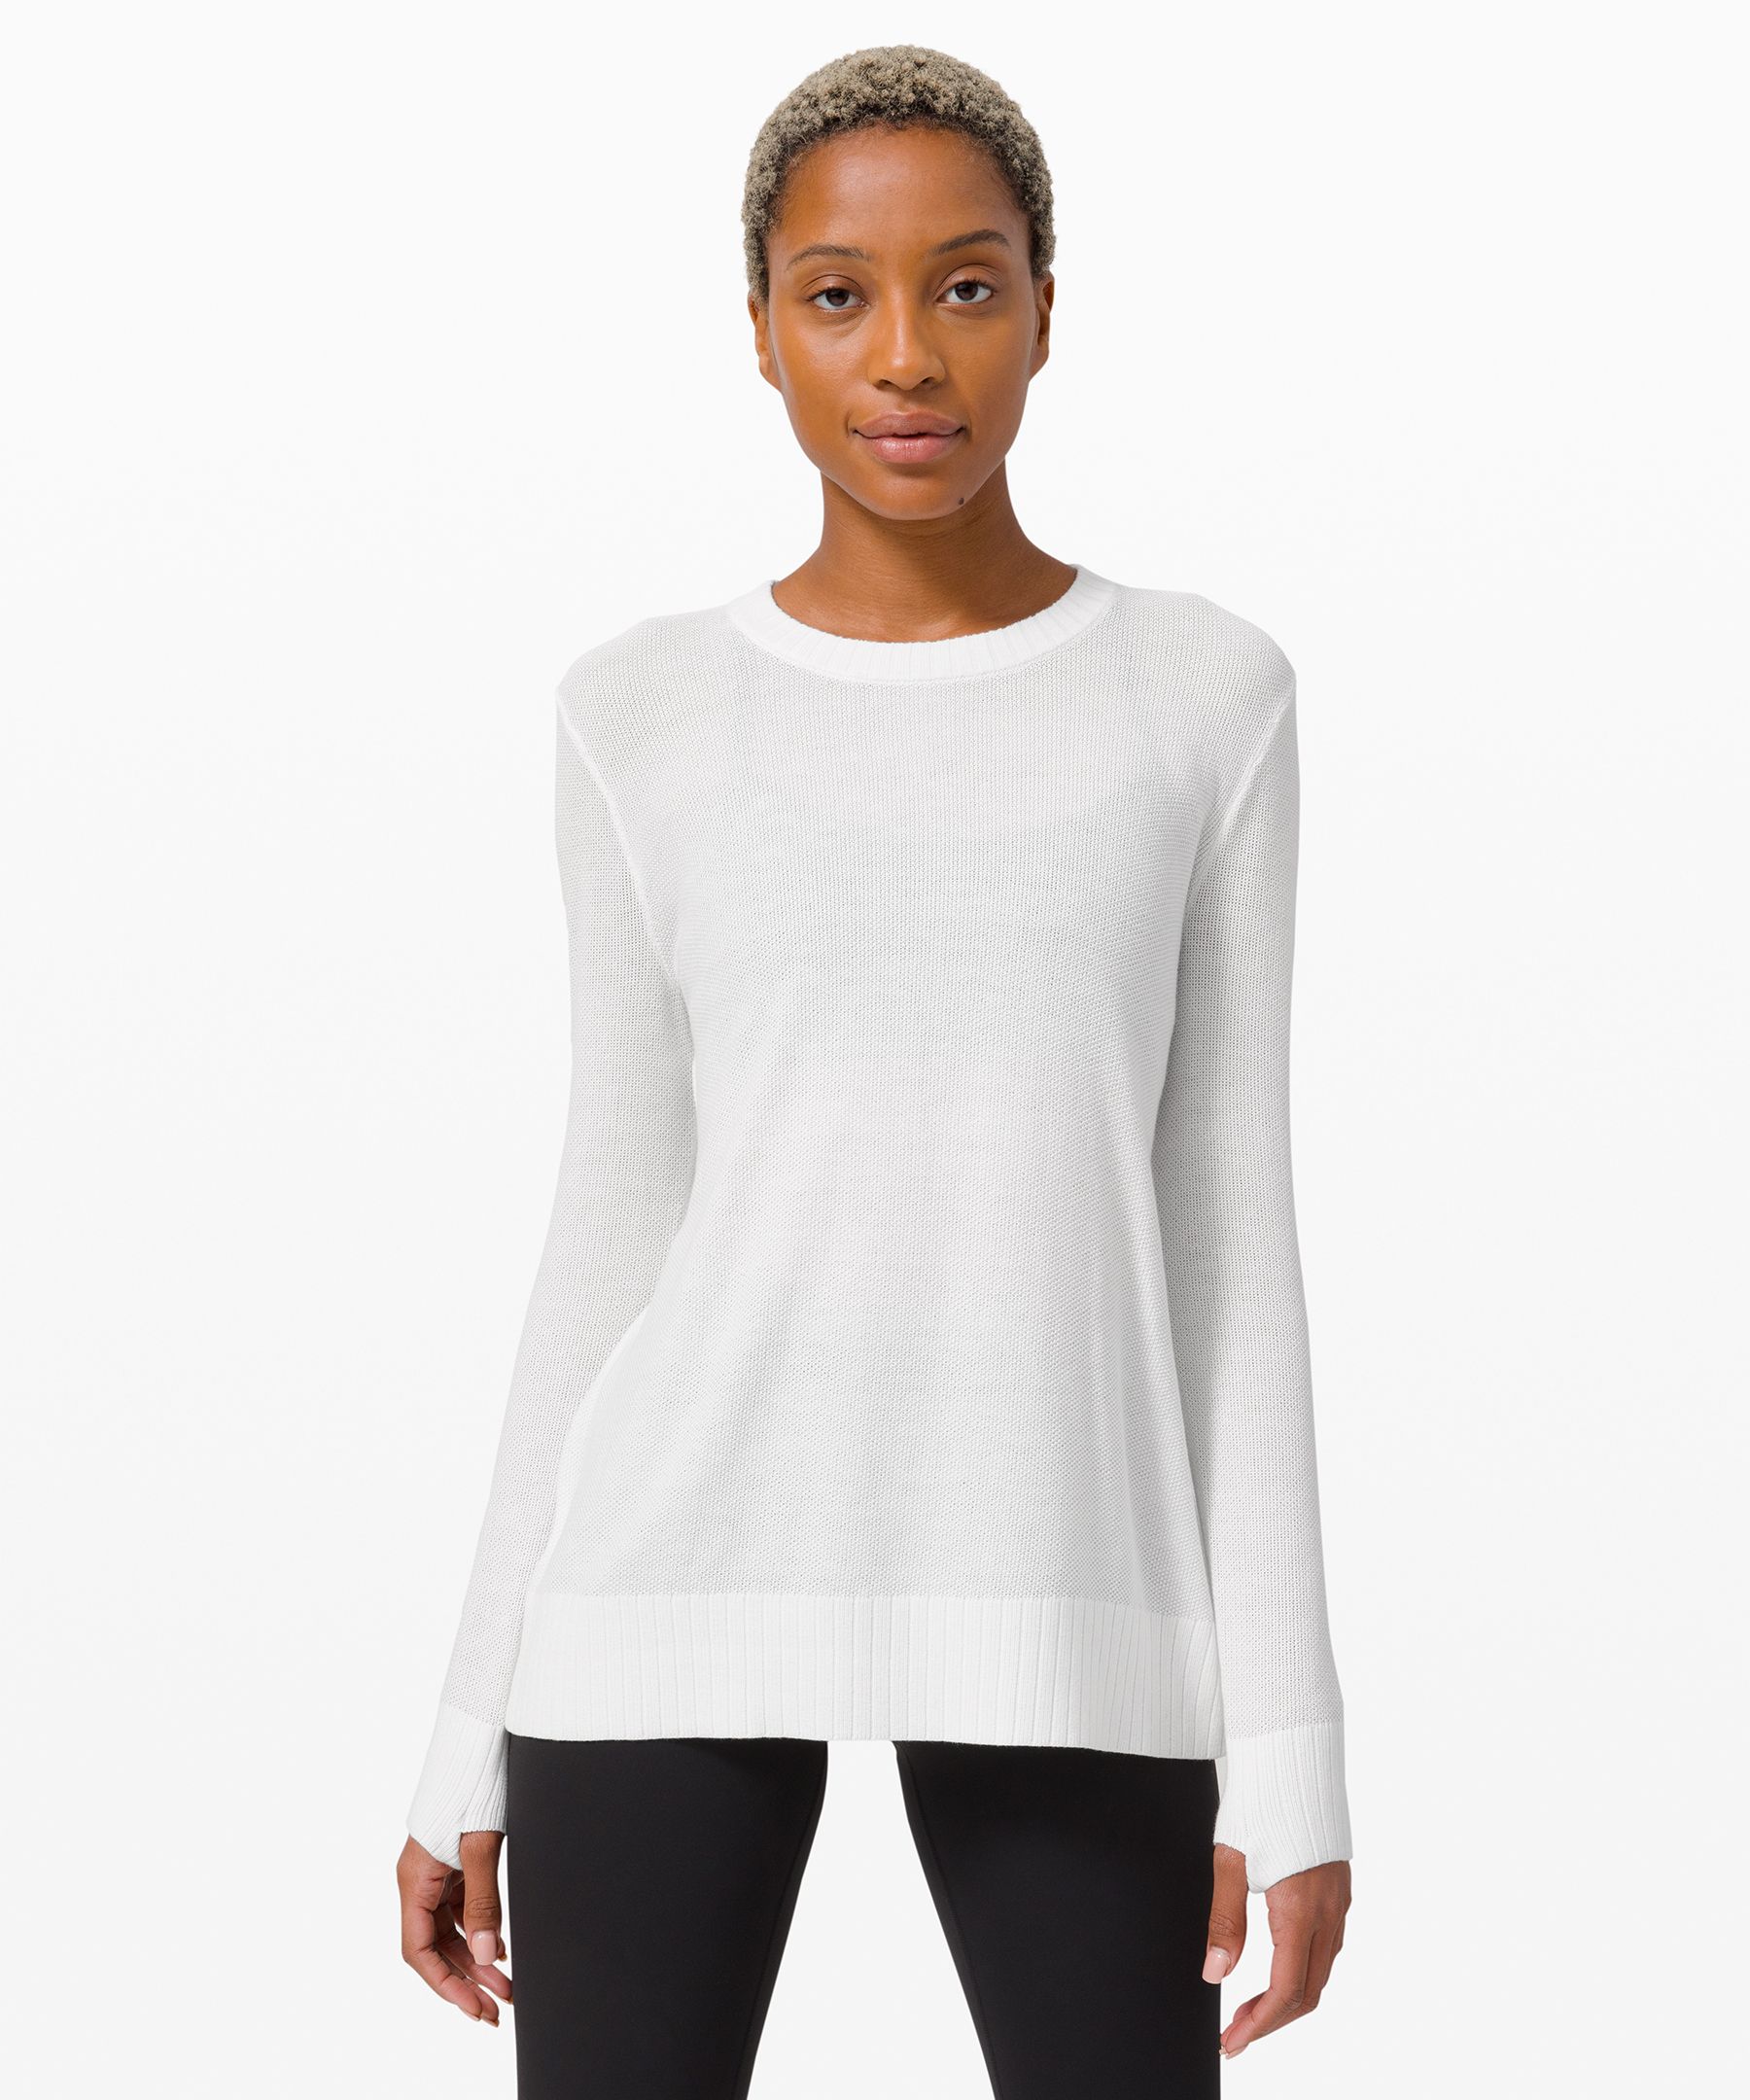 Lululemon Sincerely Yours Sweater In 